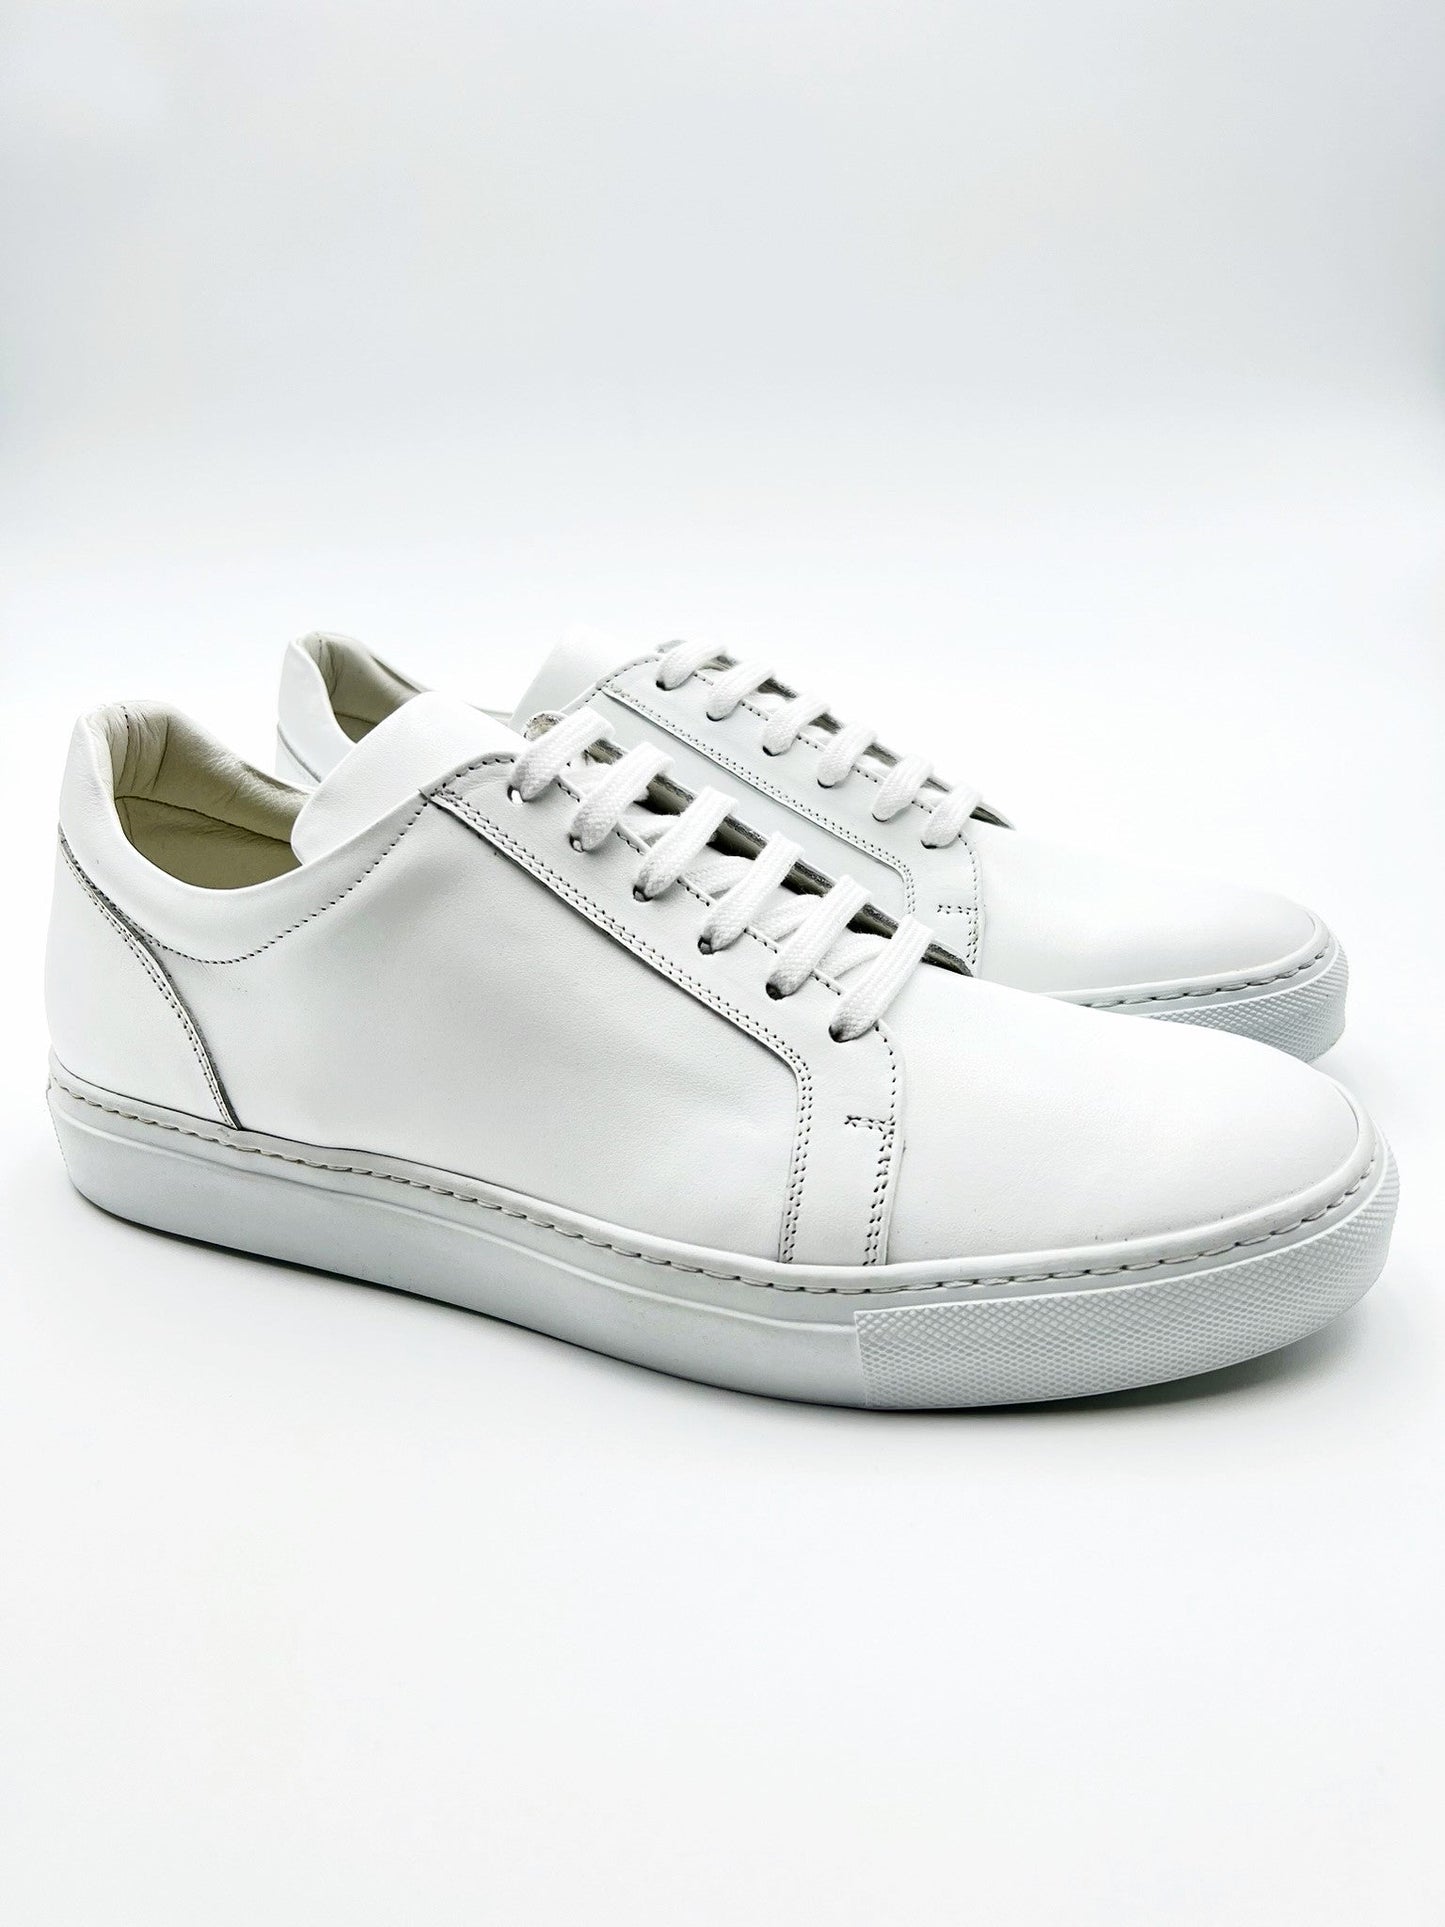 Low sneaker,in white nappa calfskin. Bottom with rubber  sole sewn with “cassetta” traditional method The upper is mounted on  a soft insole located inside the sole, and is secured by stitching to the top of the edge.Process: Cassetta - Leather: Suede calf leather -  Color: white - Lining: White calf leather - Bottom: White  rubberHandcrafted shoes, made in Italy with genuine 100% -  Sartoria Dei Duchi-Atri